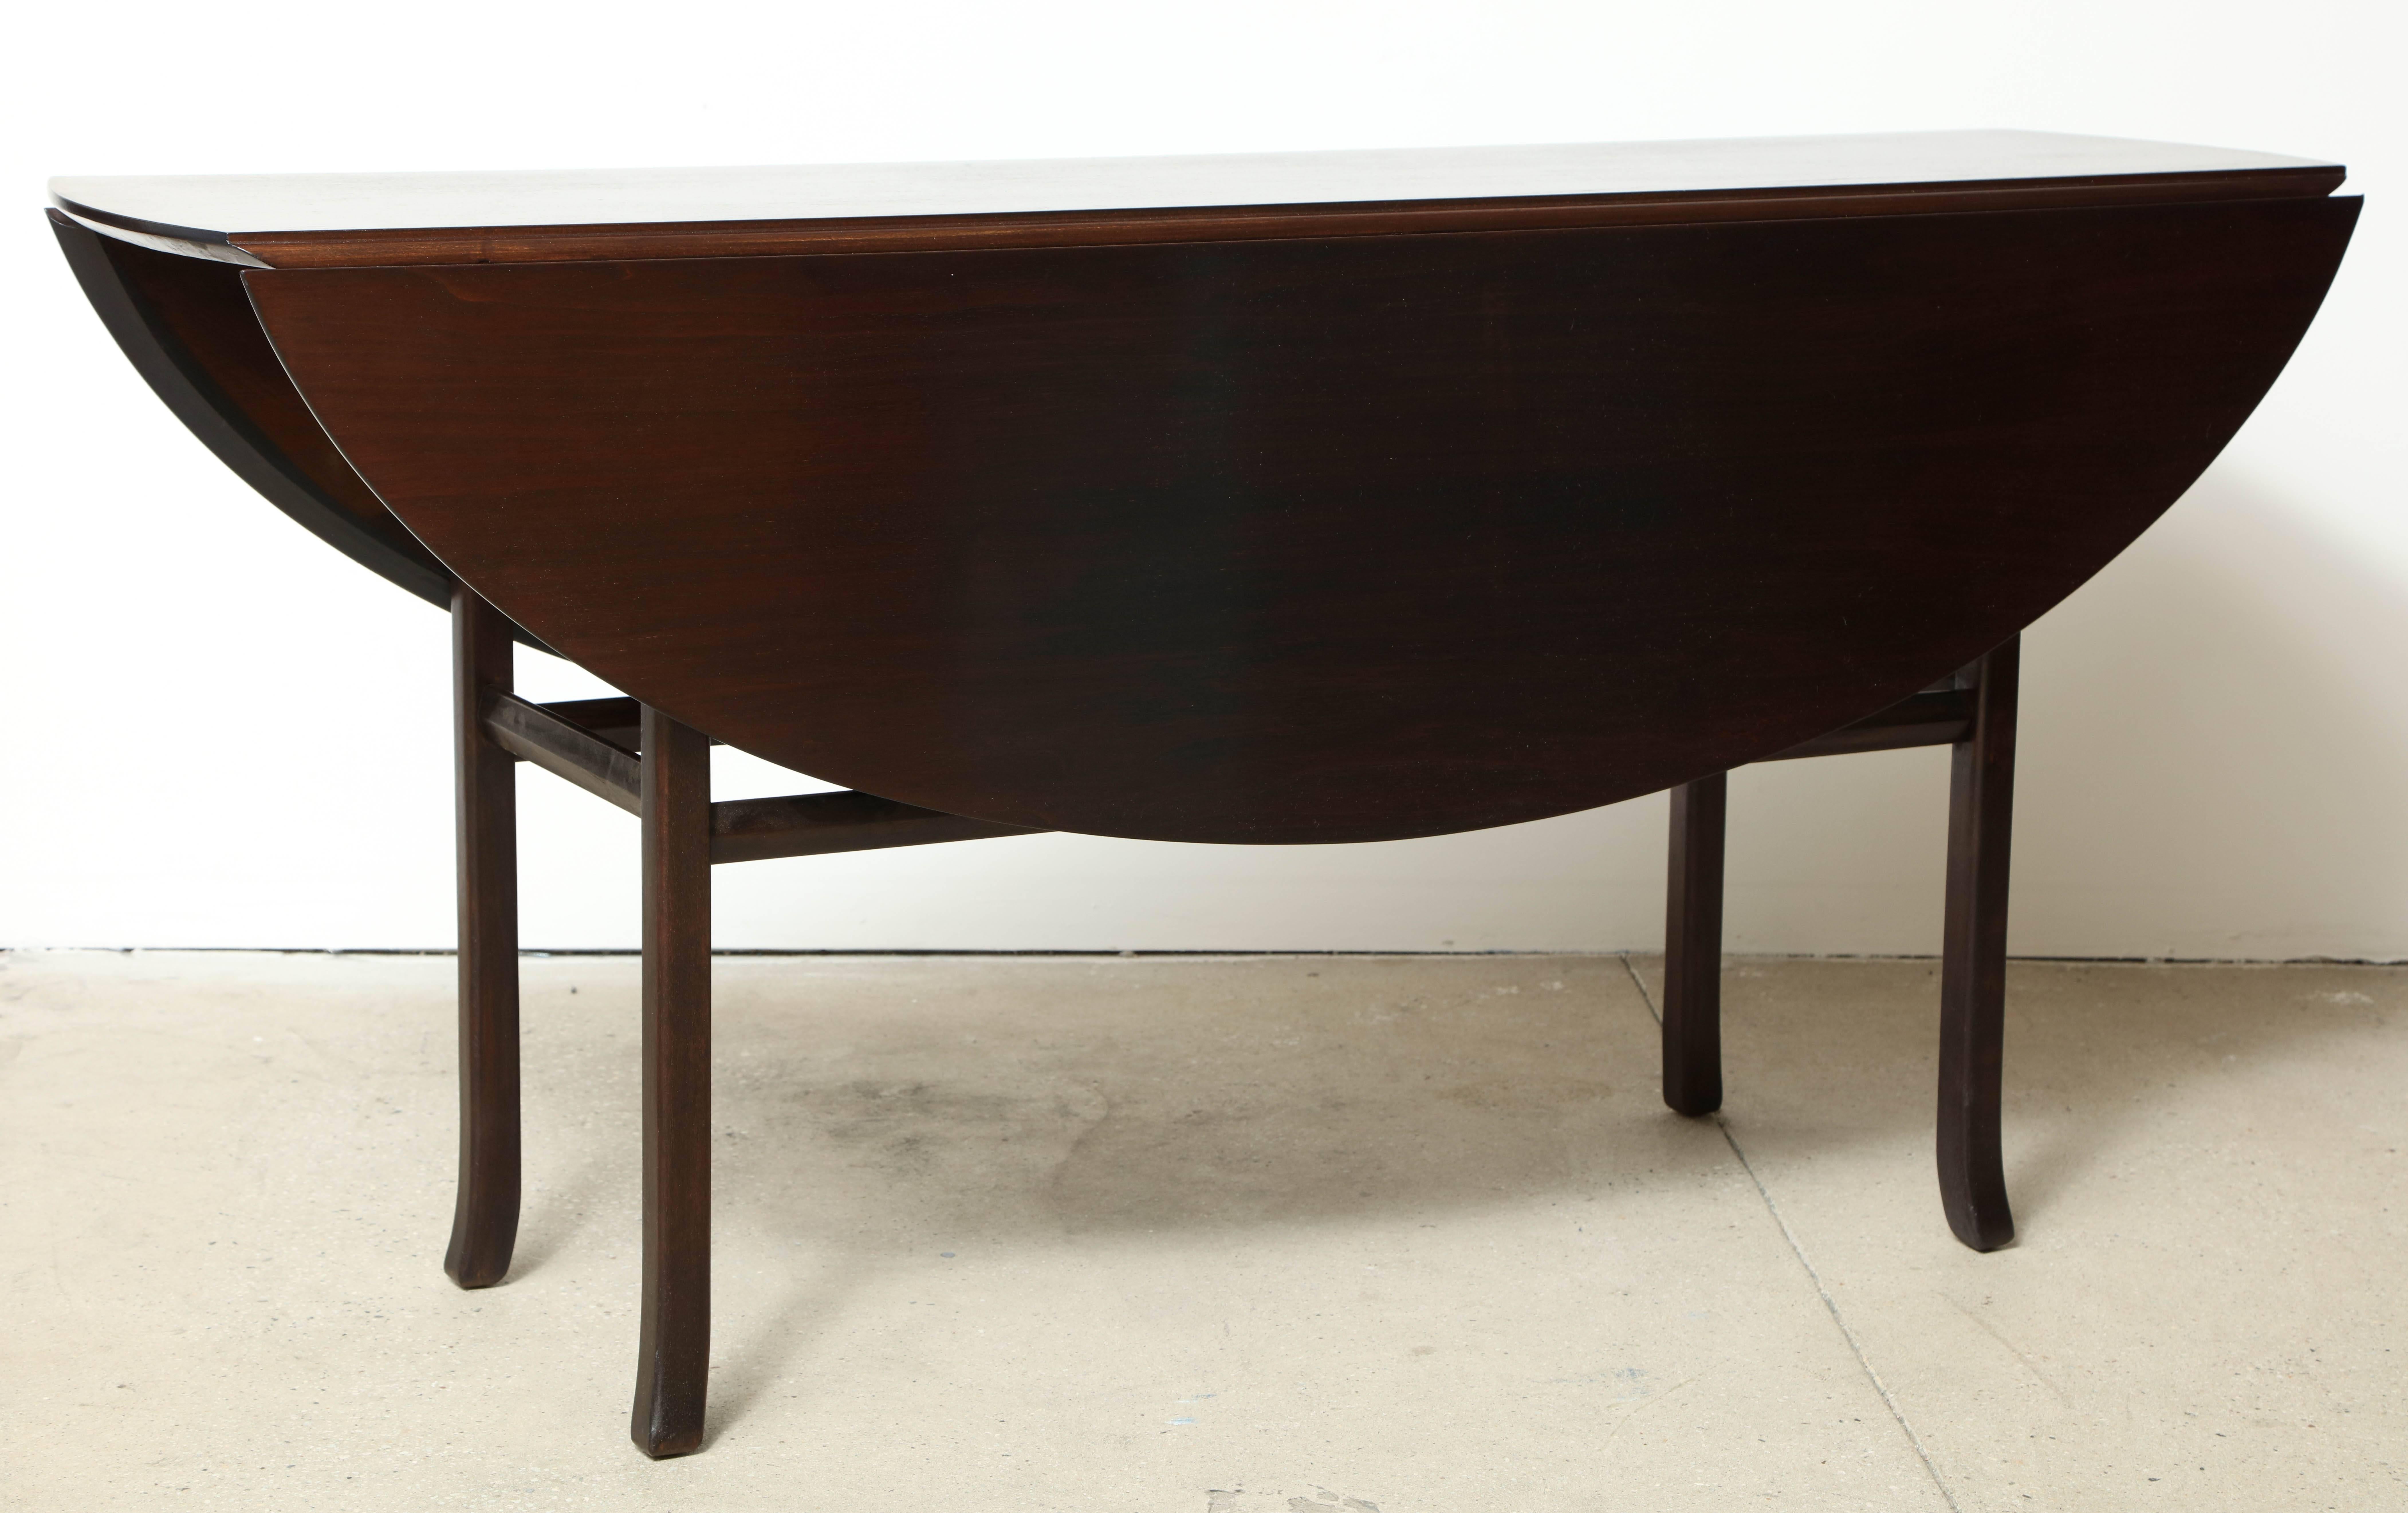 A walnut double drop-leaf console table by Kip Stewart, circa 1950, refinished.
Closed dimensions: 60" W x 17" D x 29-1/4" H.
Open dimensions: 60" W x 45" D x 29-1/4" H.